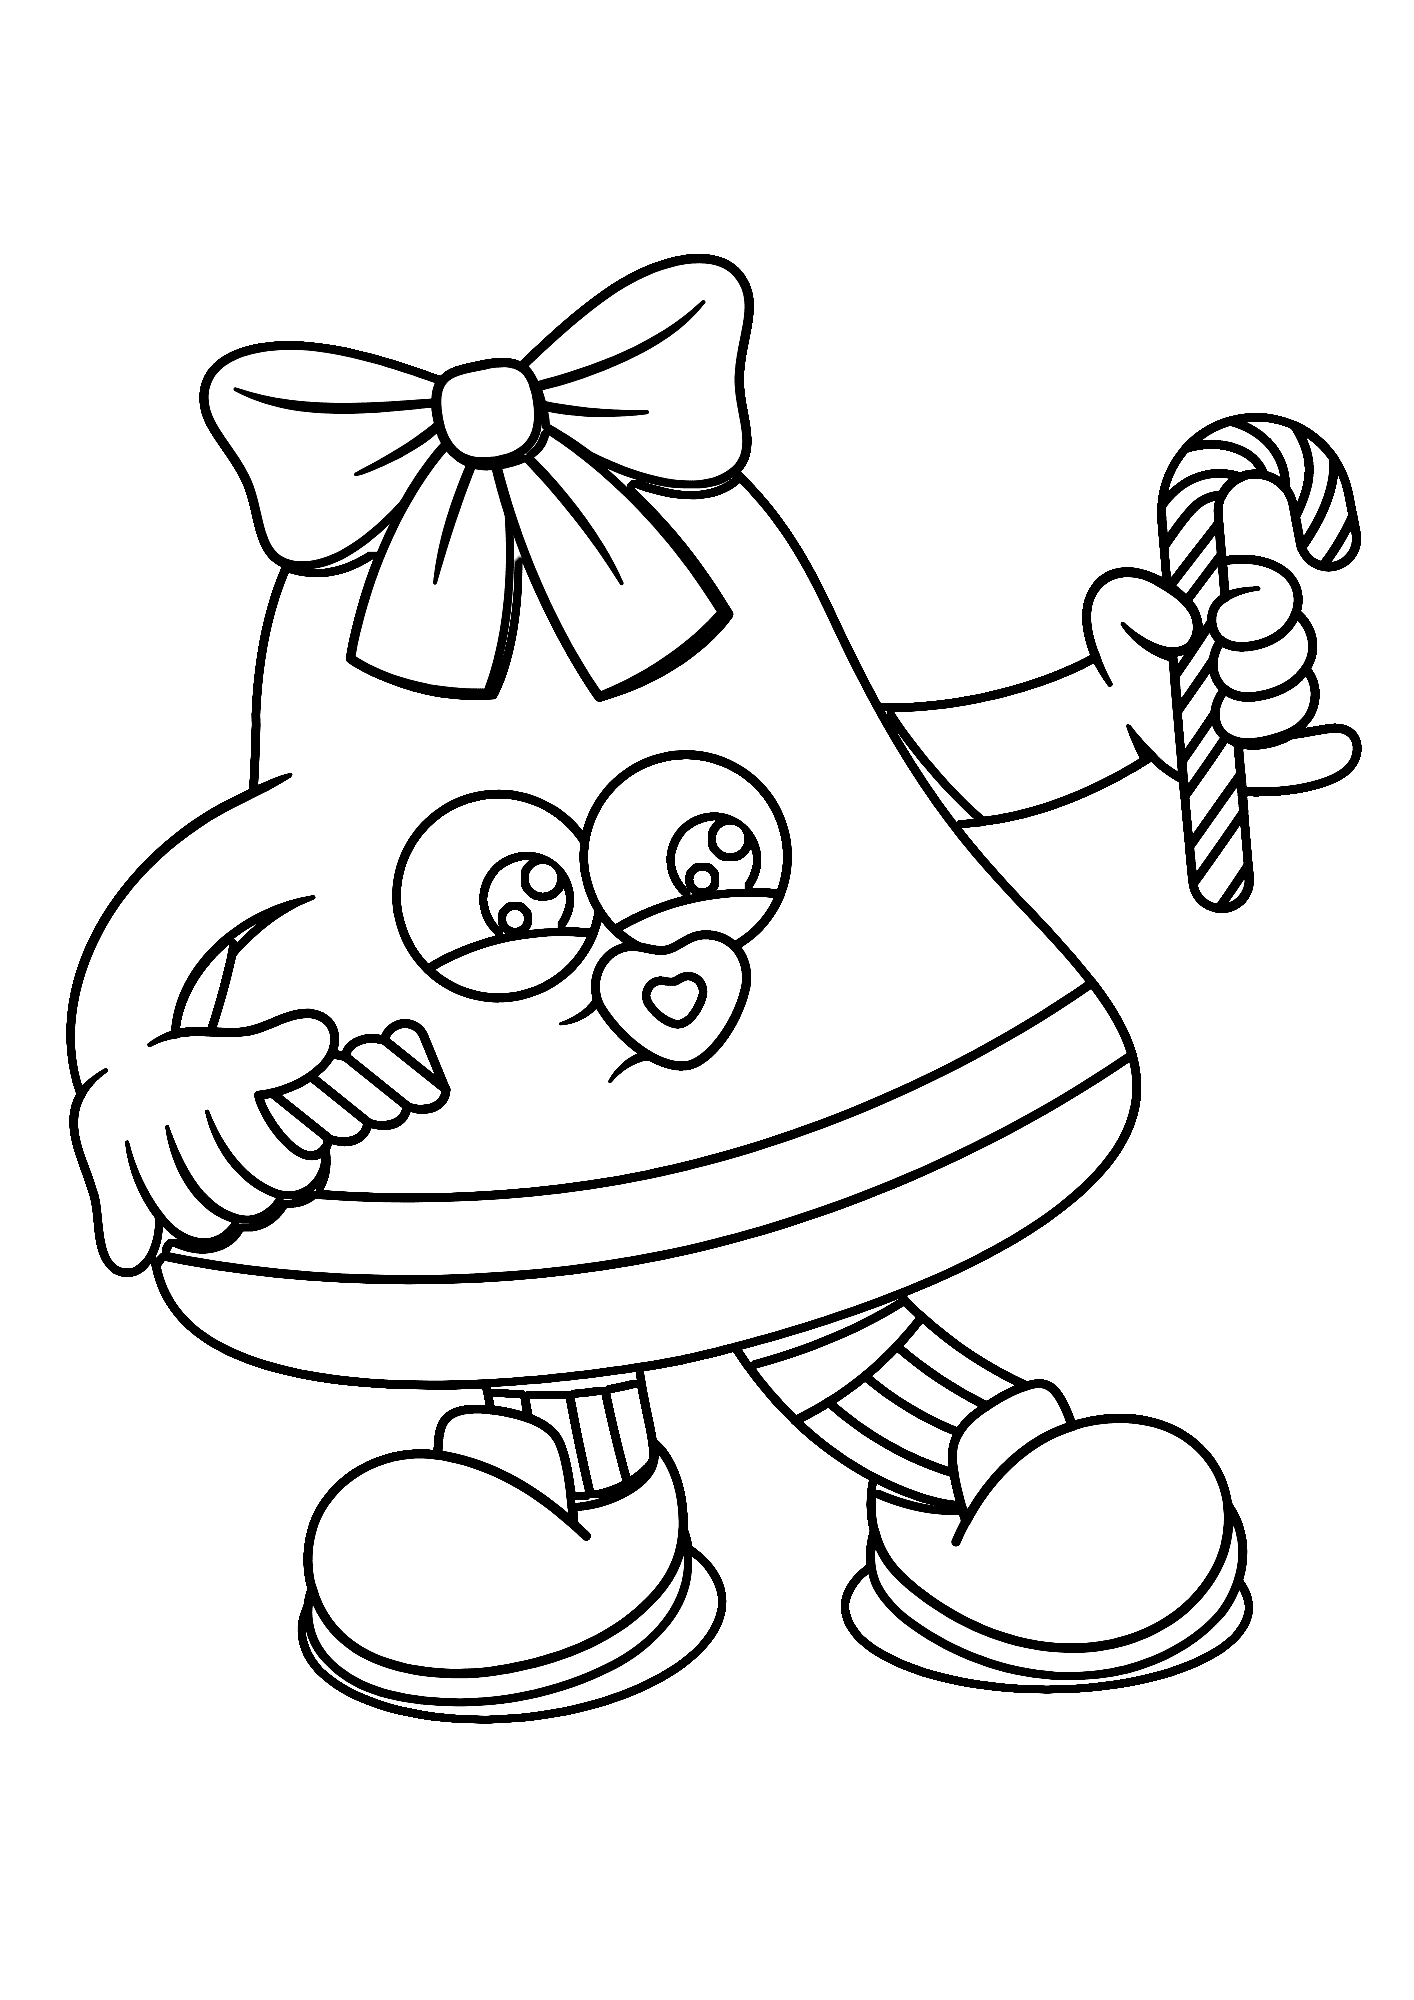 Groovy Christmas Bell Coloring Page